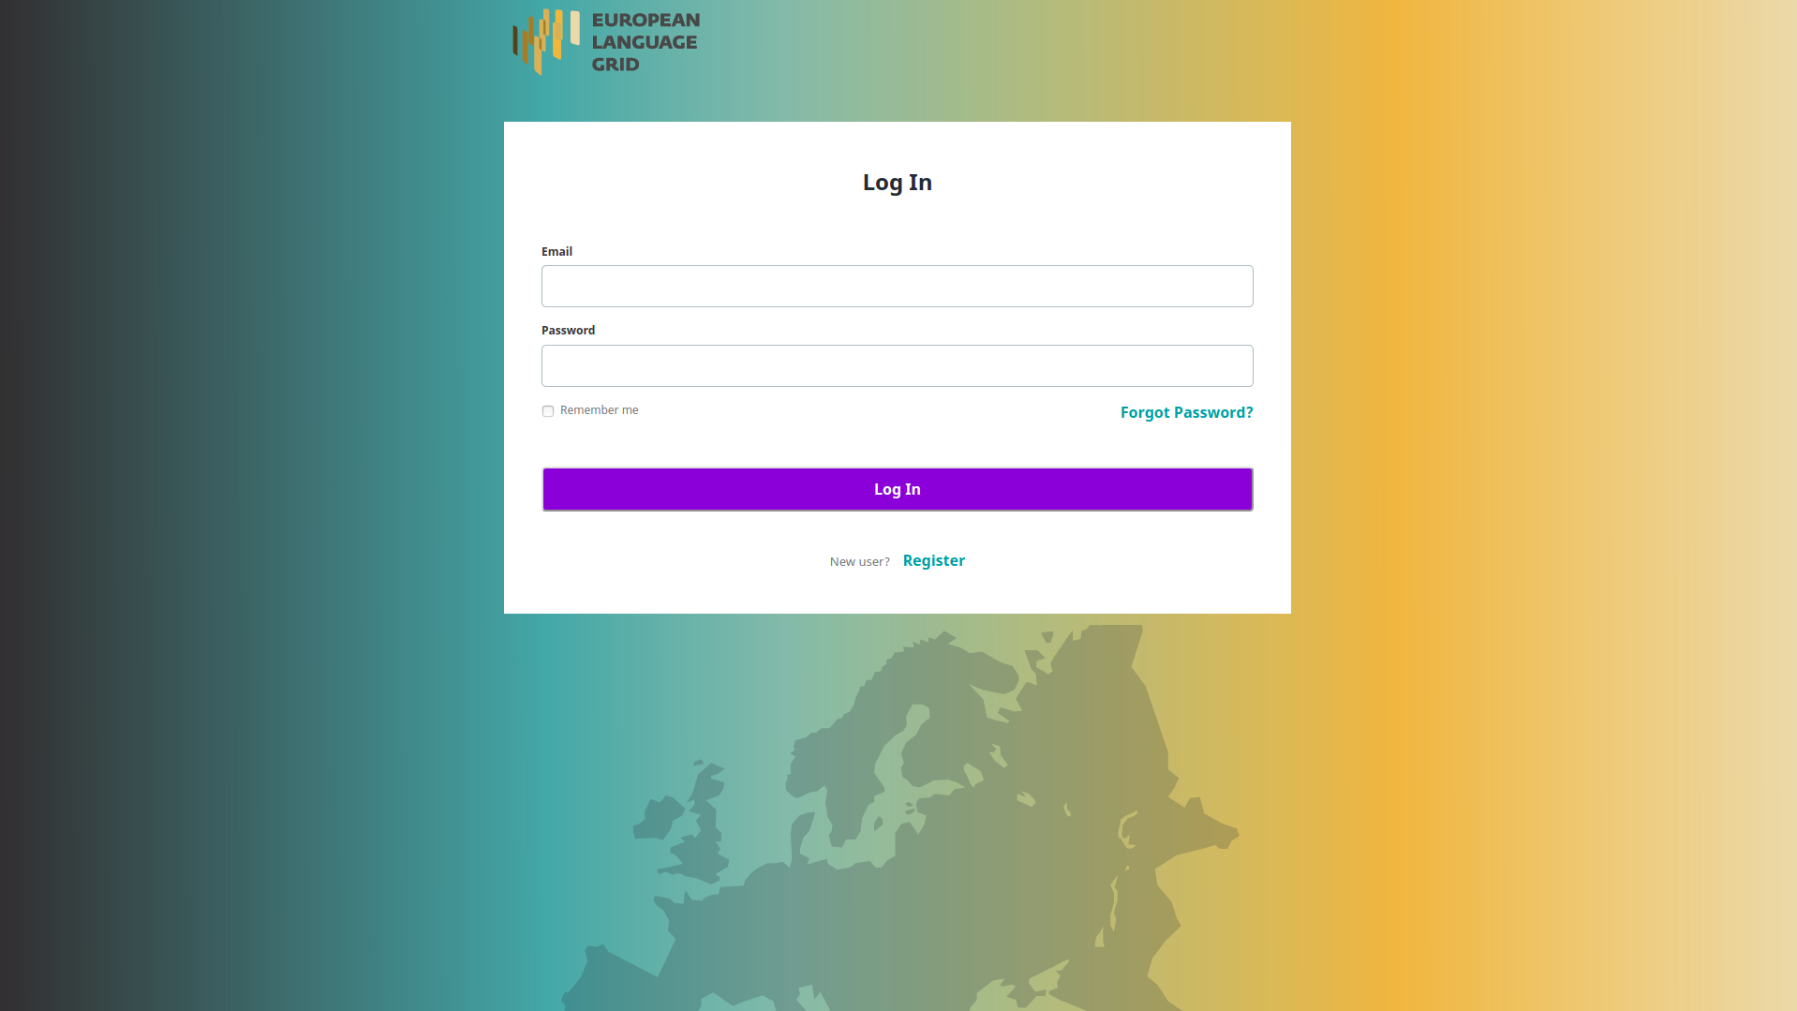 The login view